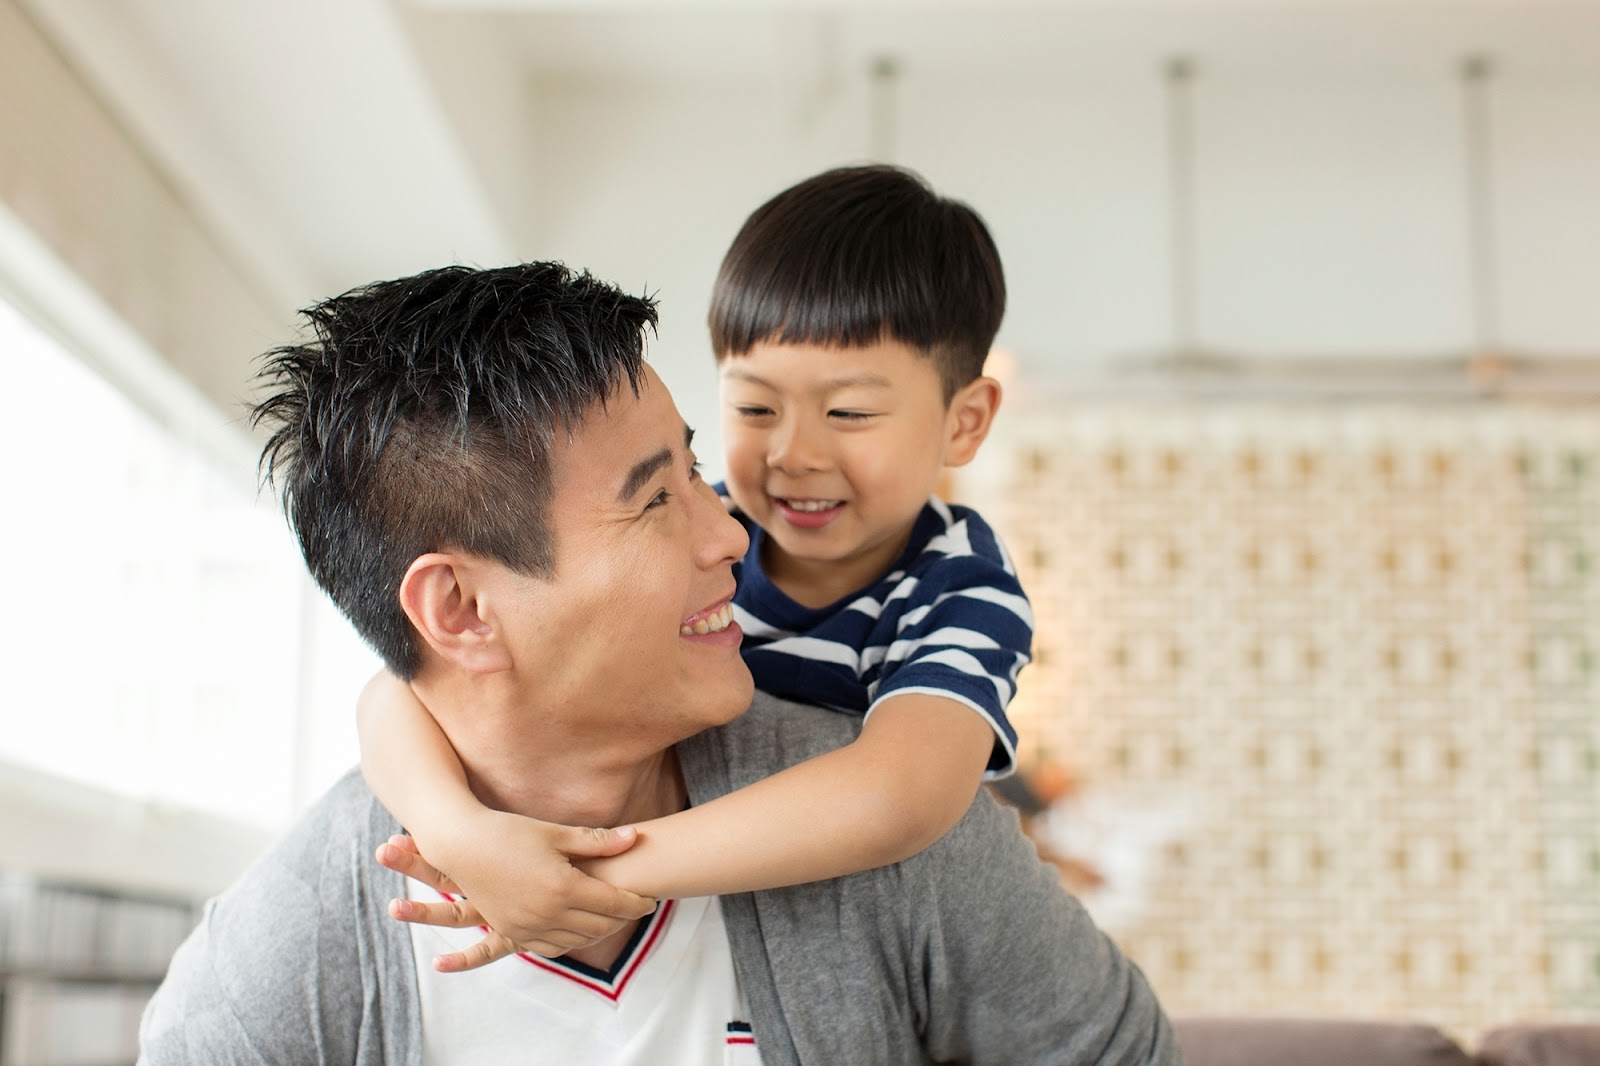 3 Ways to Bond With Your Father This Father’s Day